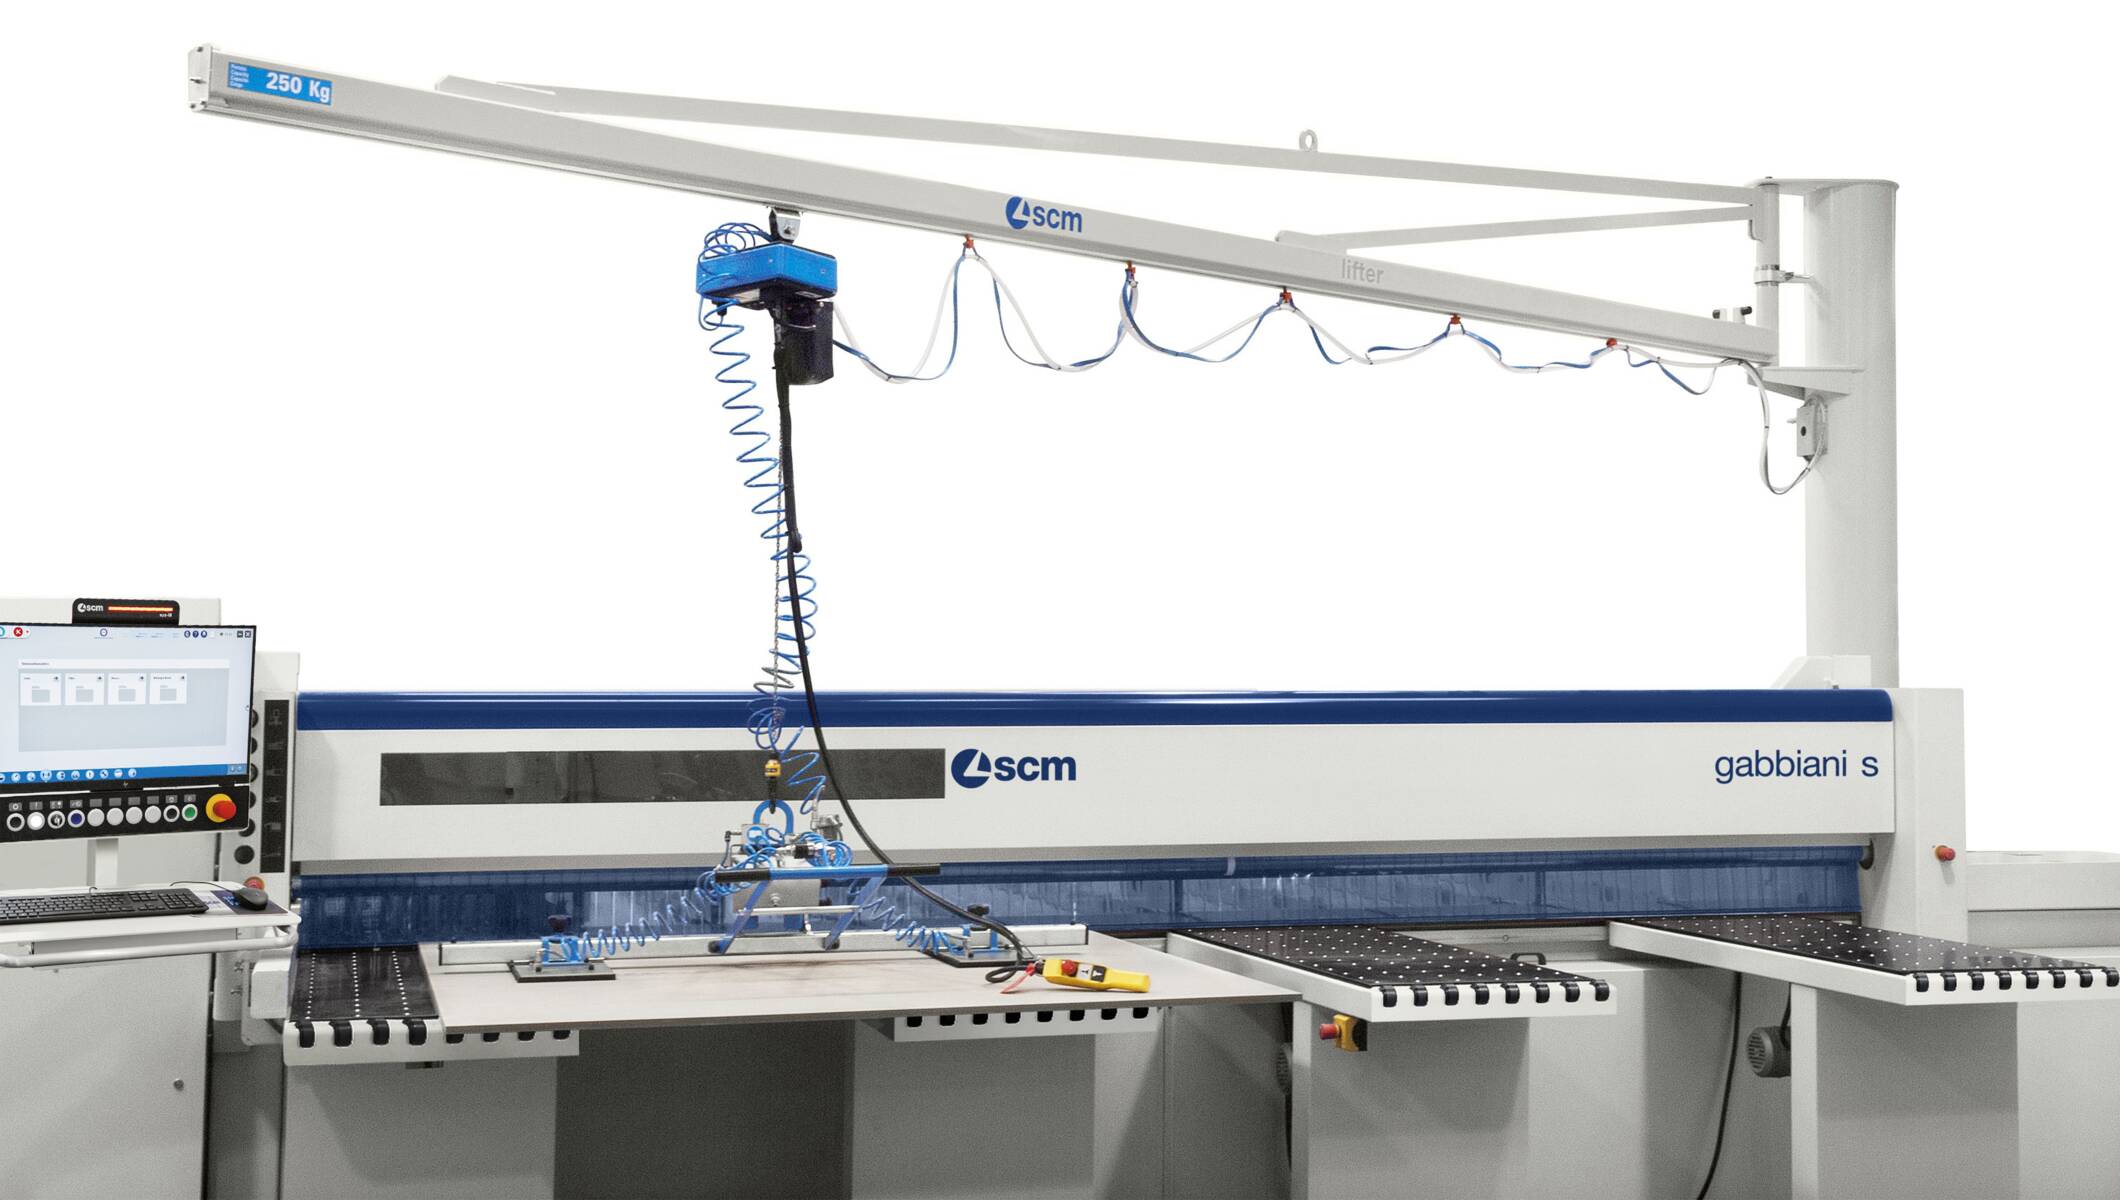 Beam saws - Flexible panel sizing cells - lifter